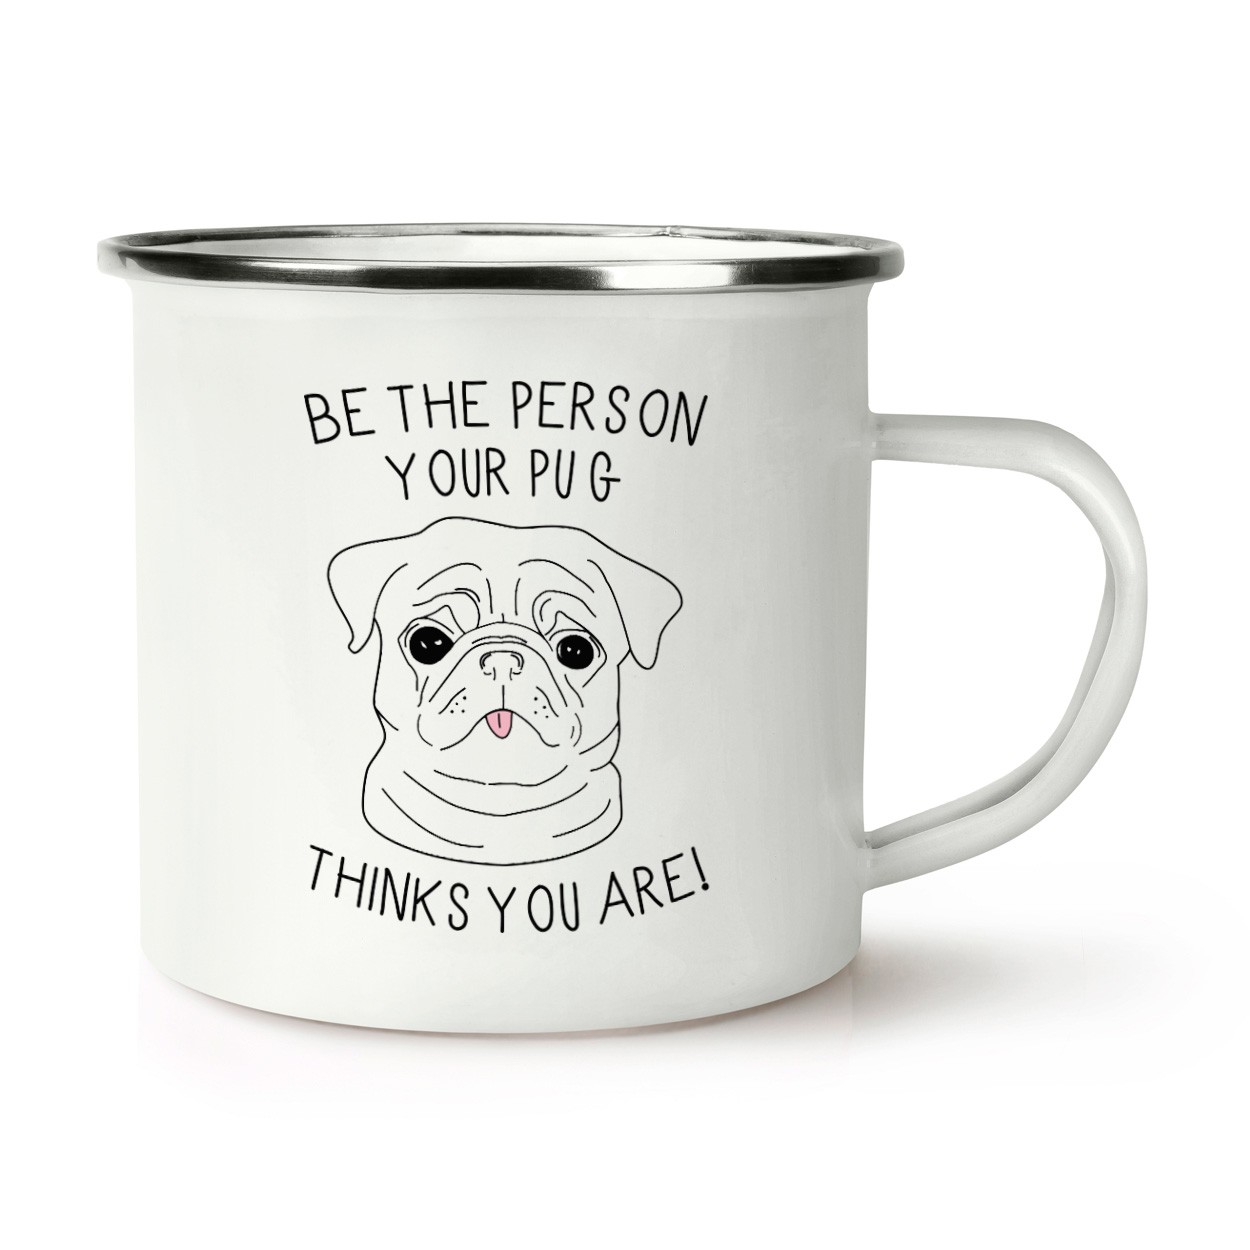 Be The Person Your Pug Thinks You Are Retro Enamel Mug Cup